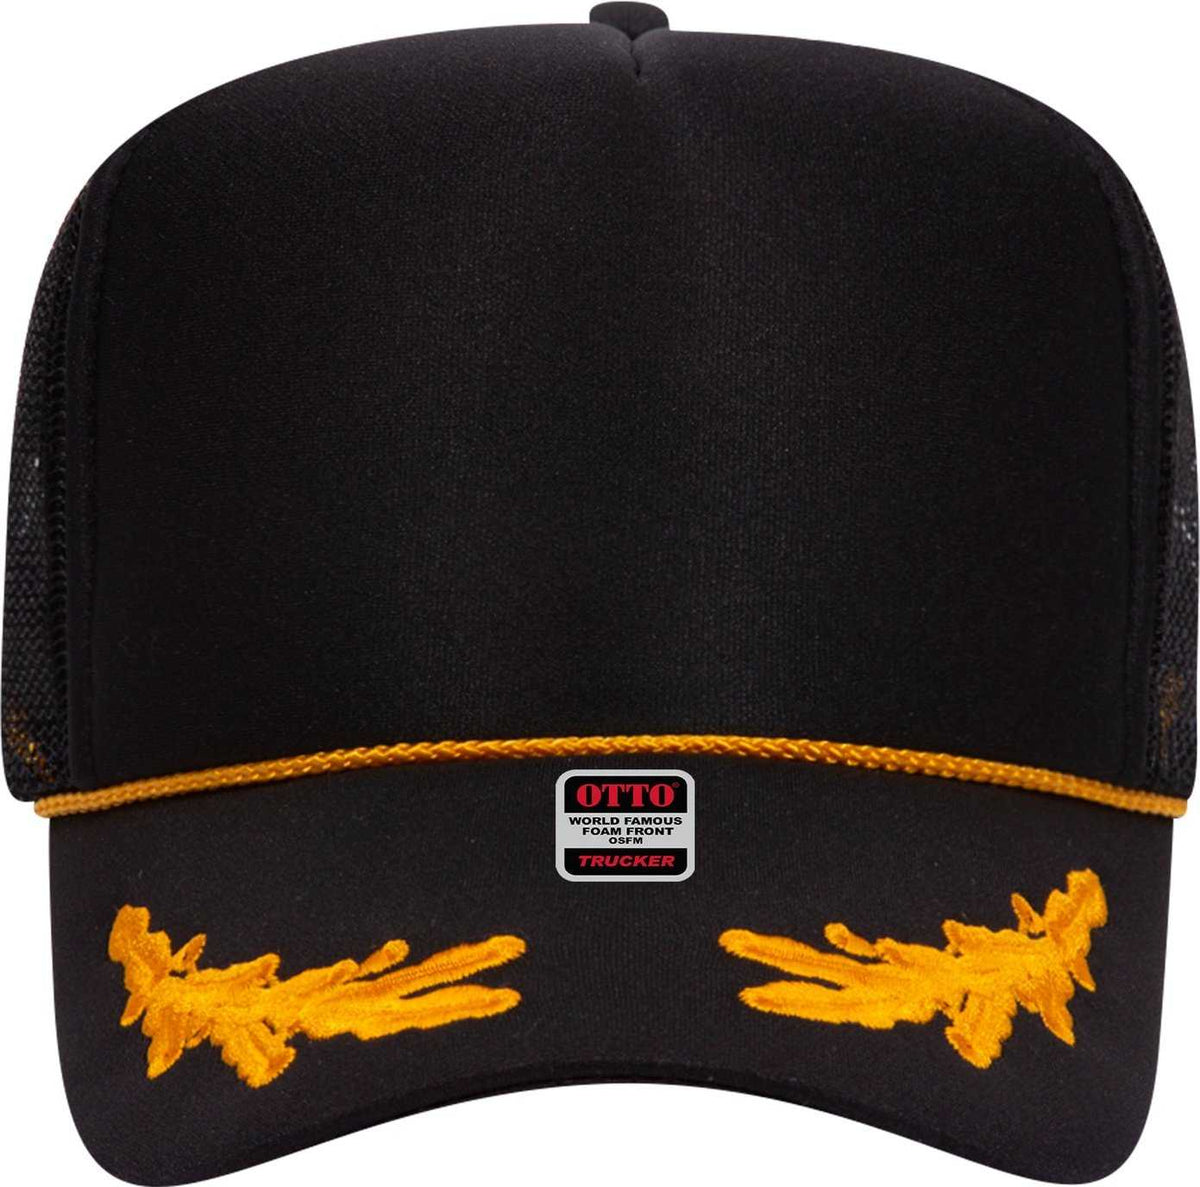 Otto 39-165 Cap 5 Panel High Crown Mesh Back Trucker Hat - 003G - Blk/Gld - HIT a Double - 2